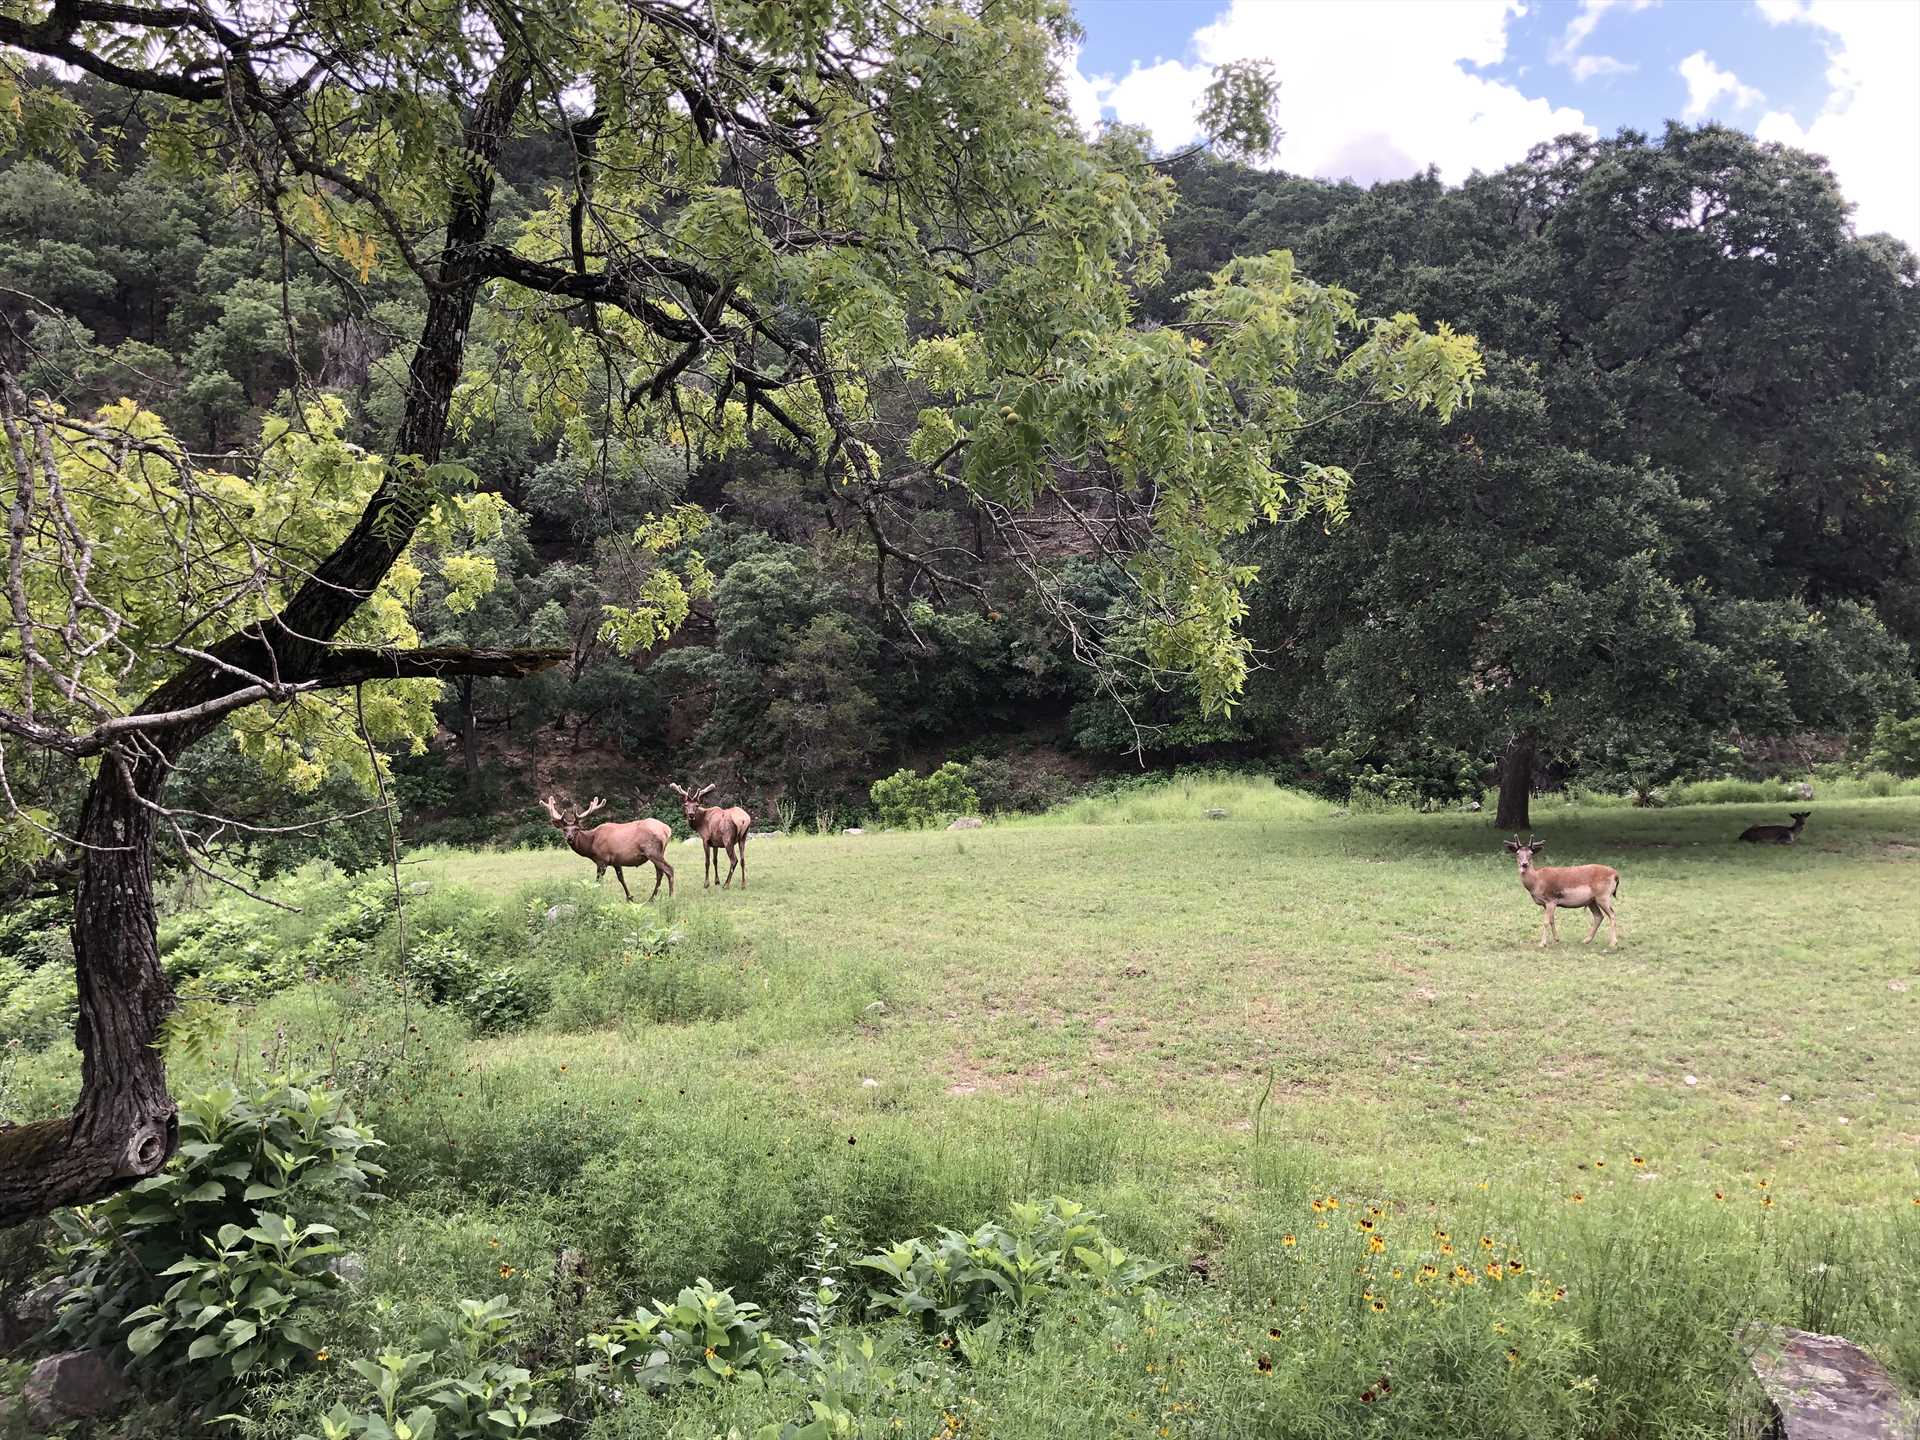                                                 Wildlife are encouraged to visit the ranch as a safe space, and this presents a great opportunity for our guests to spot them!